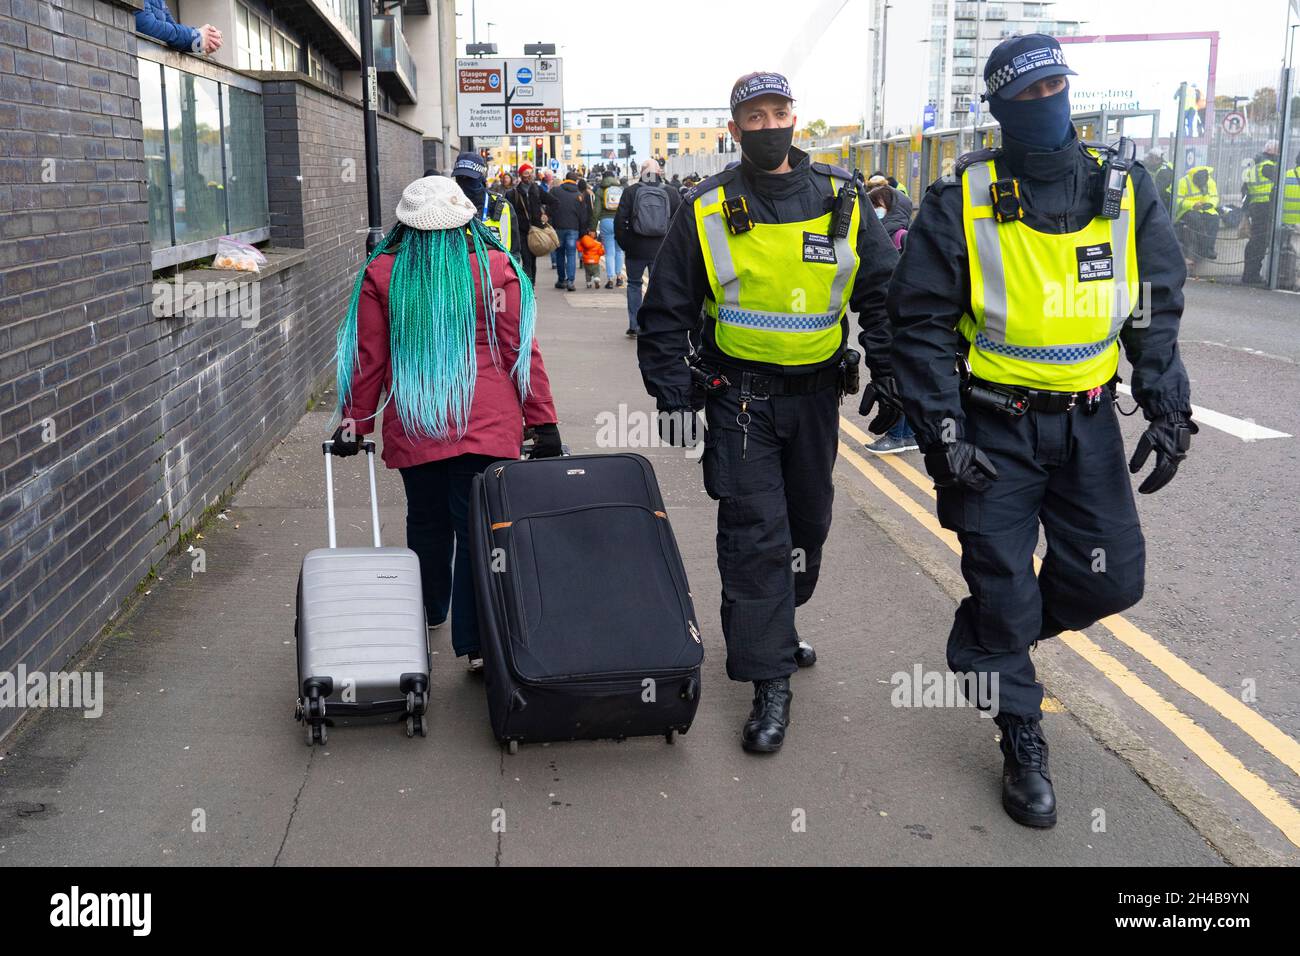 Glasgow, Scotland, UK. 1st November 2021. Images from Monday at the UN climate change conference in Glasgow. Pic; Delegate with suitcases arrives at COP26 venue as London Metropolitan police walk past.  Iain Masterton/Alamy Live News. Stock Photo